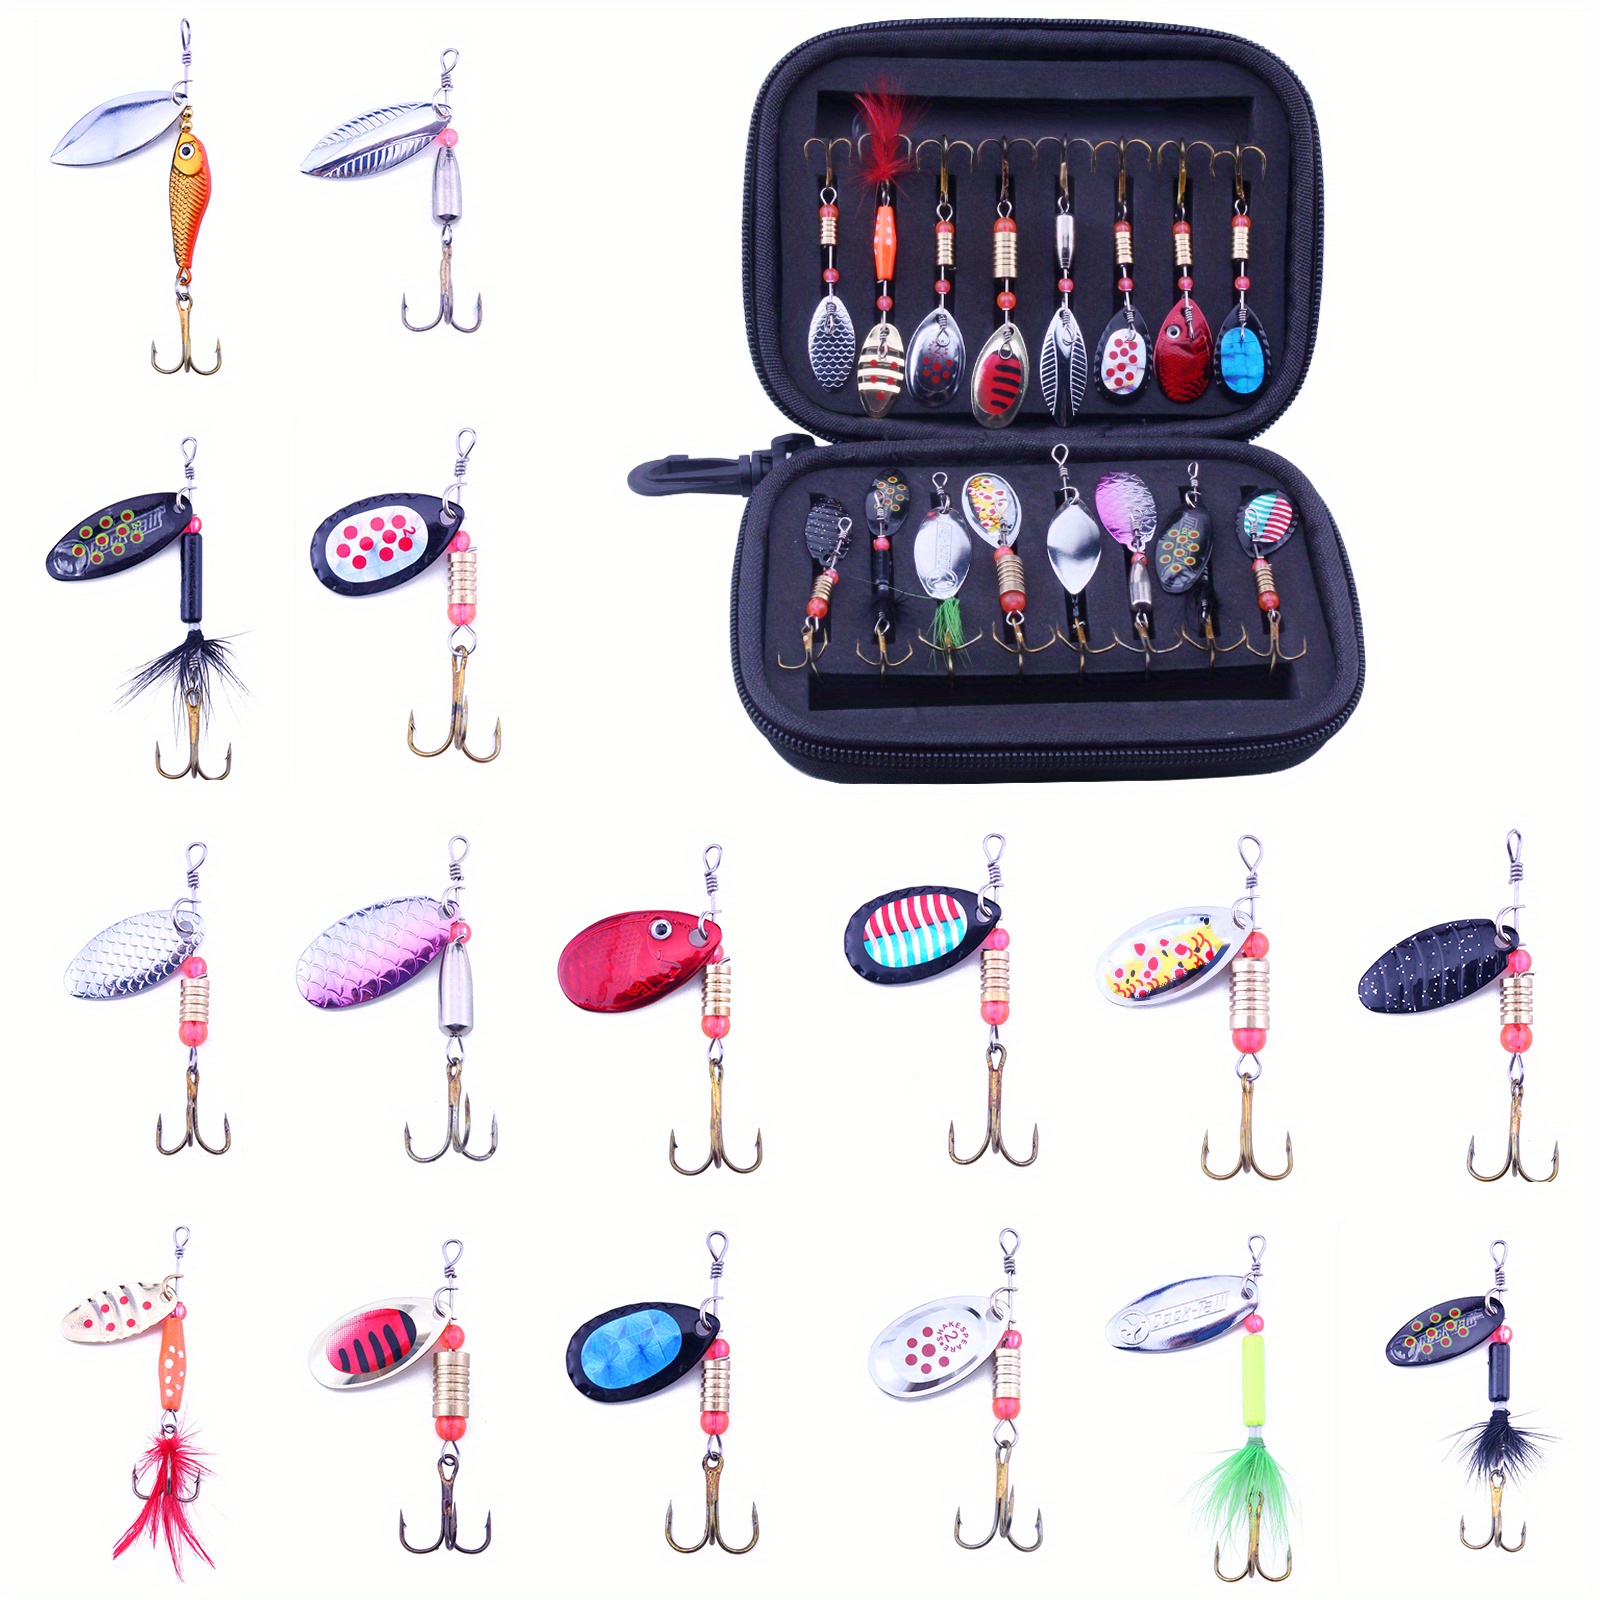 Fishing Lures Spinners Kits with Fishing Hooks Mixed Colorful Metal Spoon  Hard Lures Spinnerbaits Walleys Pikes Trout Lead Soft Lures Fishing Hooks  Tackle with Black Carry Bags (Lure Set-16pcs), Spinners & Spinnerbaits 